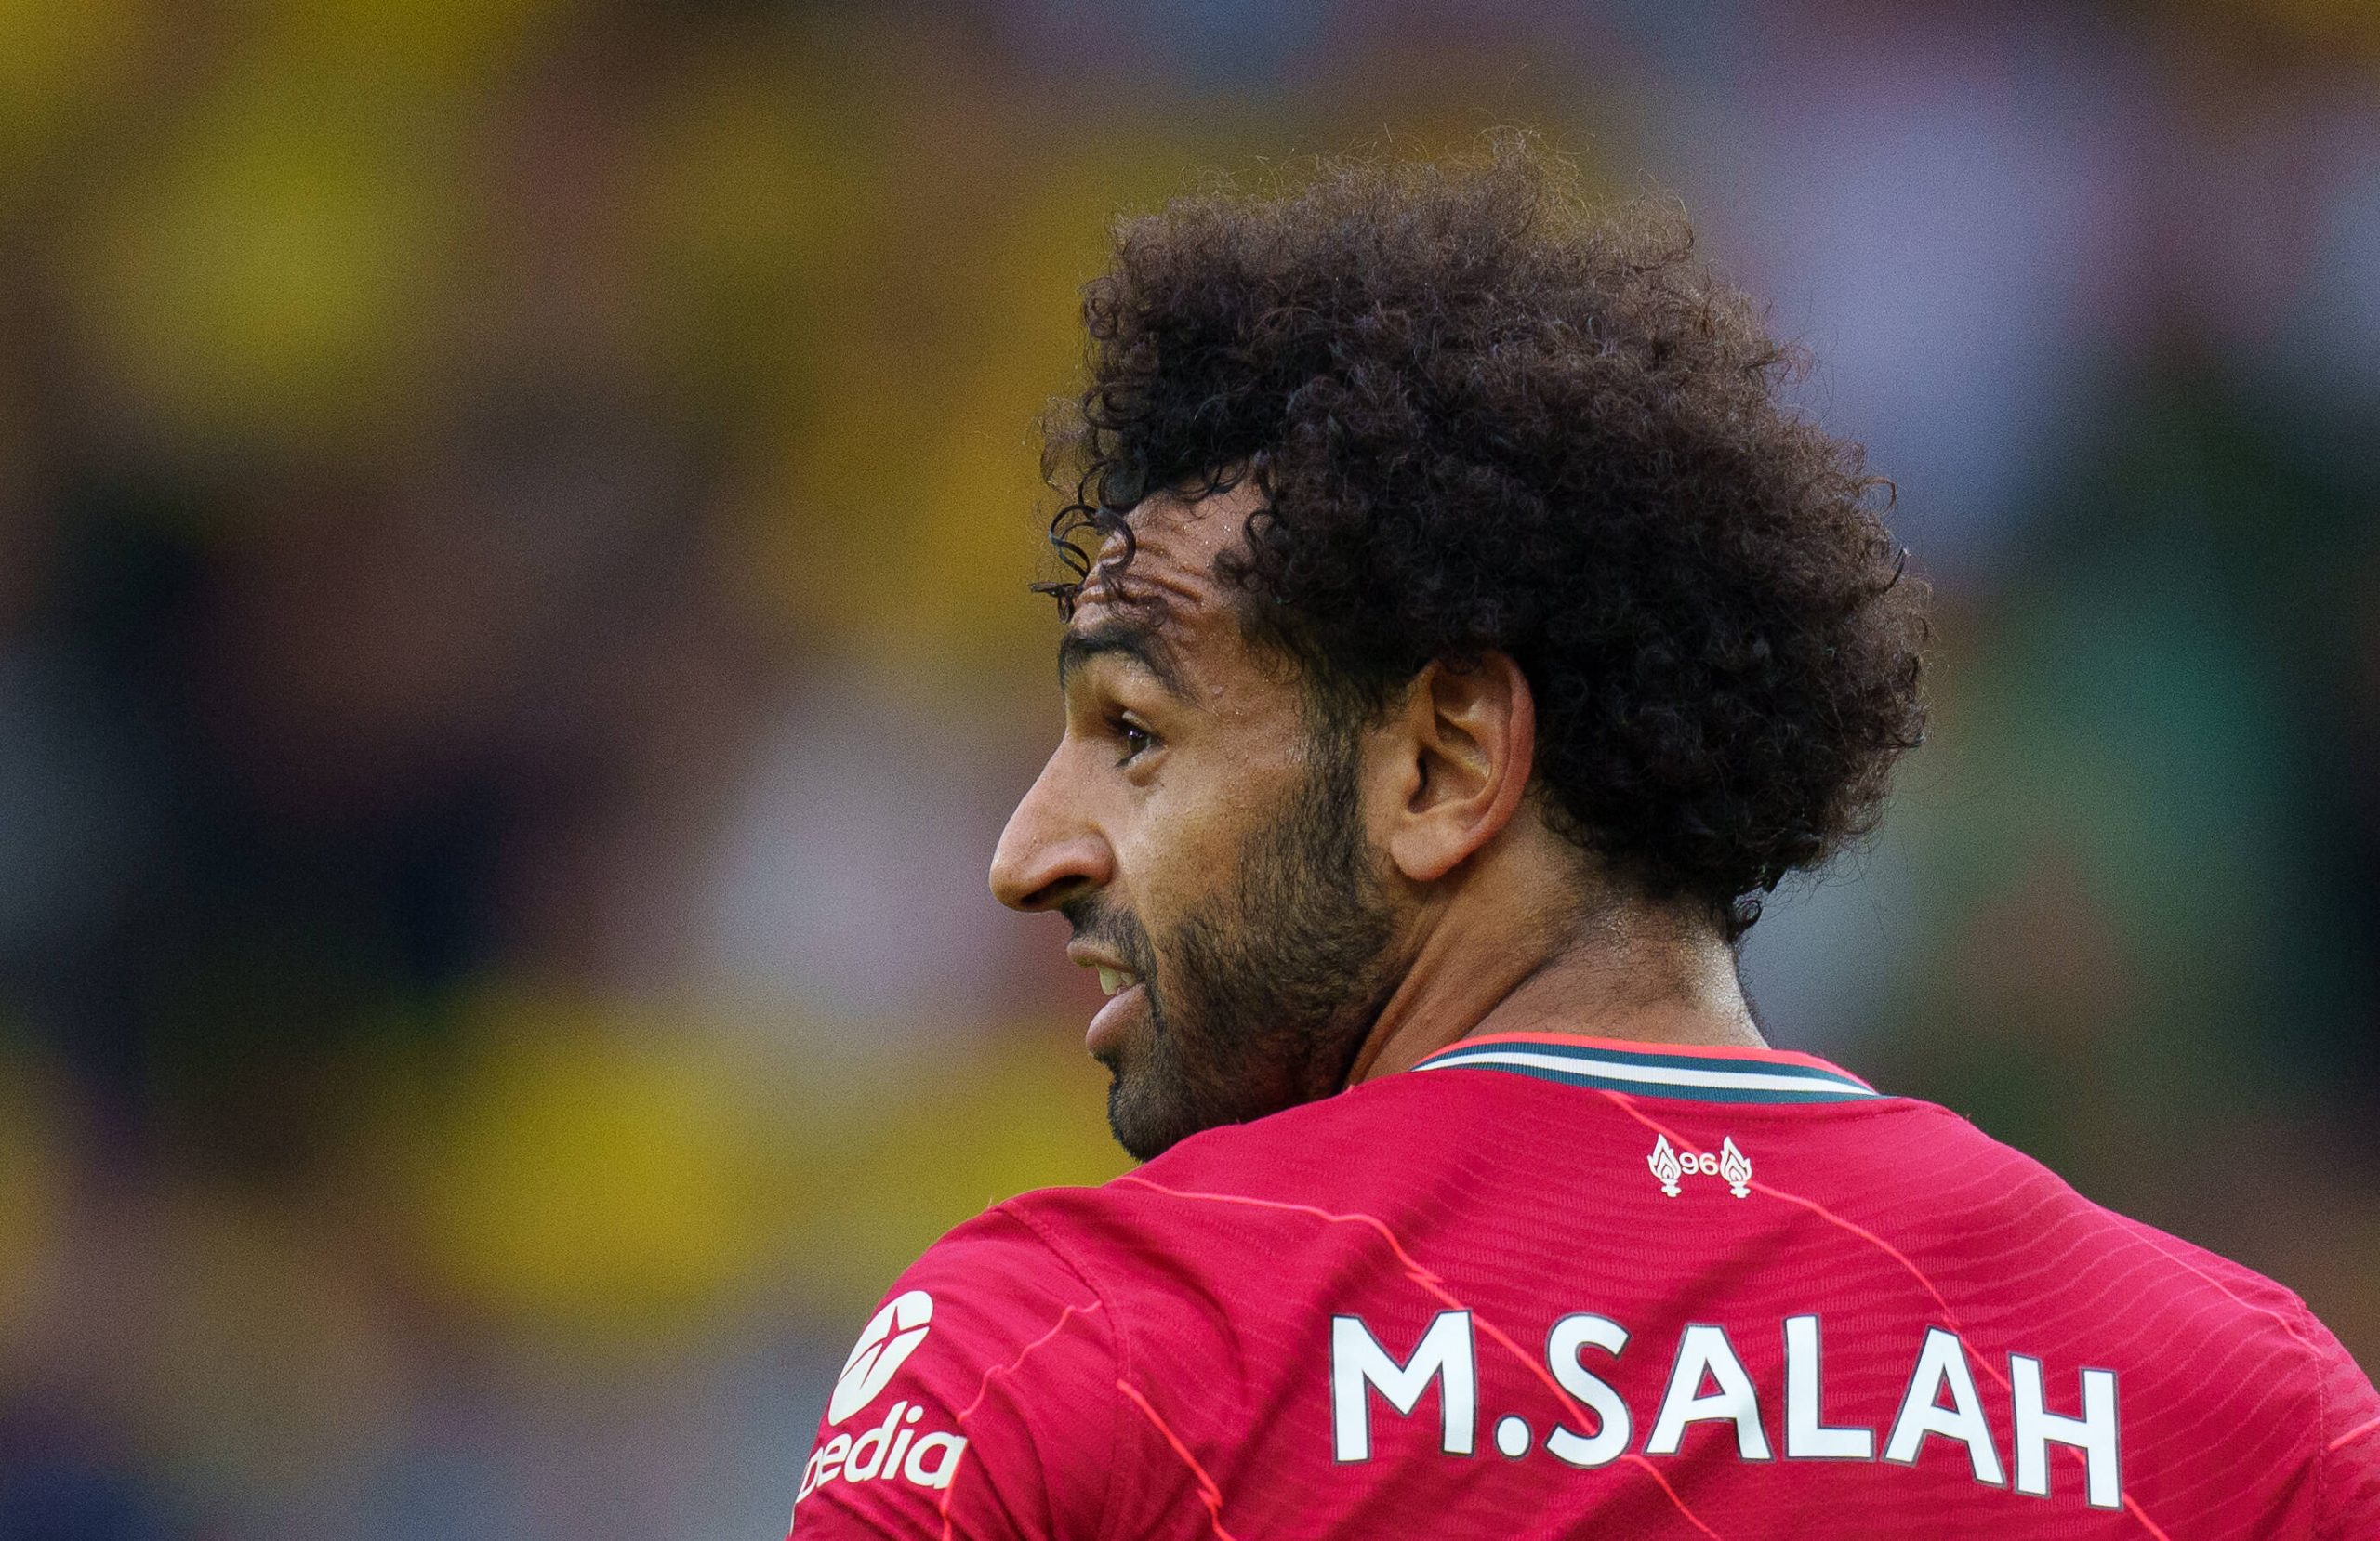 Mohamed Mo Salah of Liverpool during the Premier League match between Norwich City and Liverpool at Carrow Road, Norwich